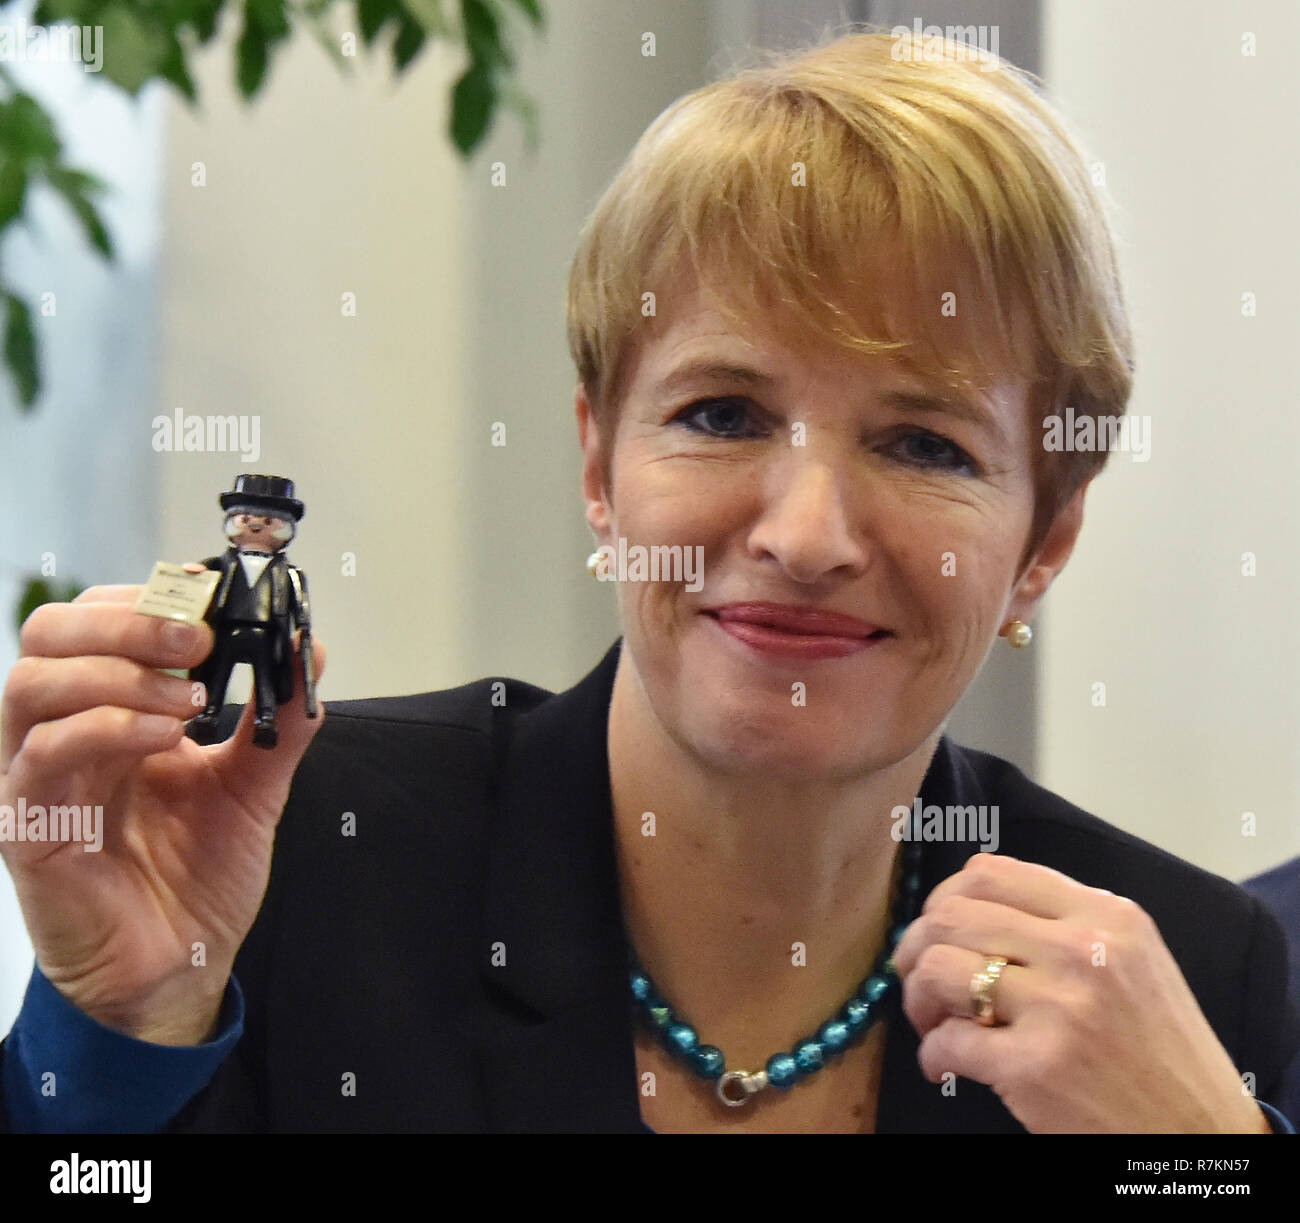 Potsdam, Germany. 10th Dec, 2018. Martina Münch (SPD), Brandenburg's Minister of Culture, shows a toy figure of the poet at a press conference for the Fontane Year. The writer, journalist and author Theodor Fontane (1819-1898) is honoured on the occasion of his 200th birthday in the coming year in Brandenburg. Credit: Bernd Settnik/dpa-Zentralbild/dpa/Alamy Live News Stock Photo